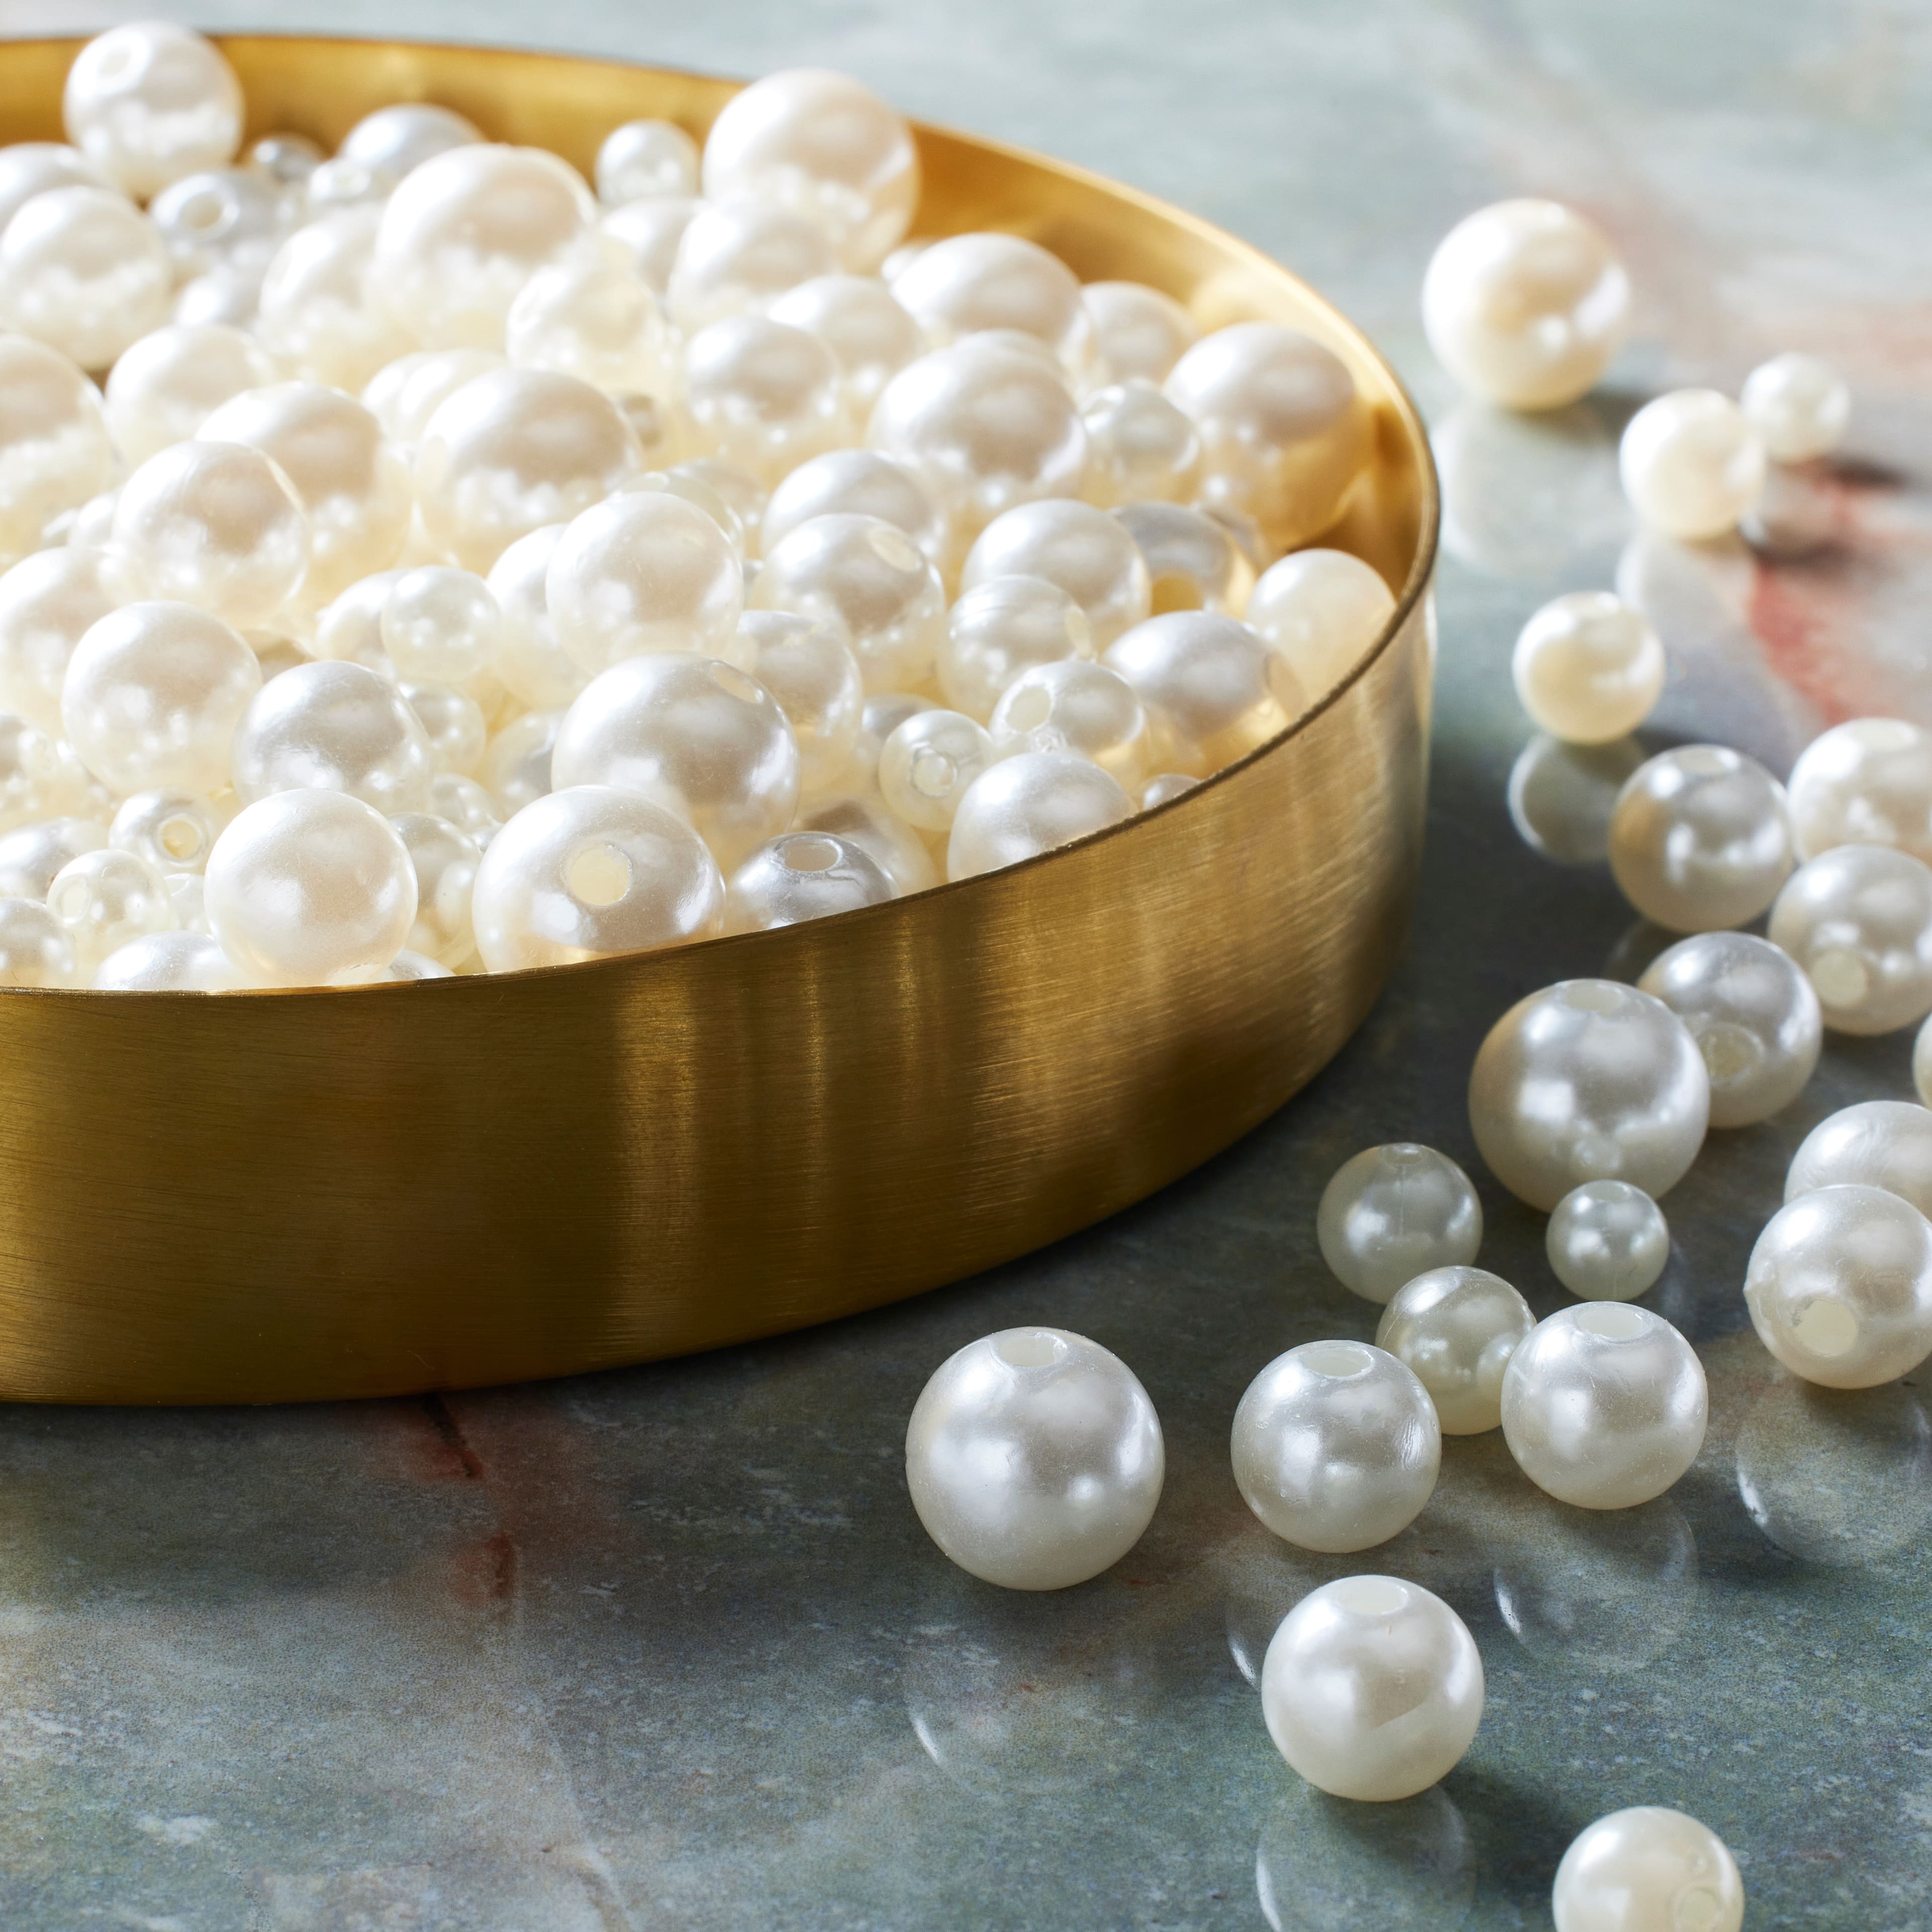 White, Cream & Gold Pearl Plastic Mix Craft Beads by Bead Landing | Michaels